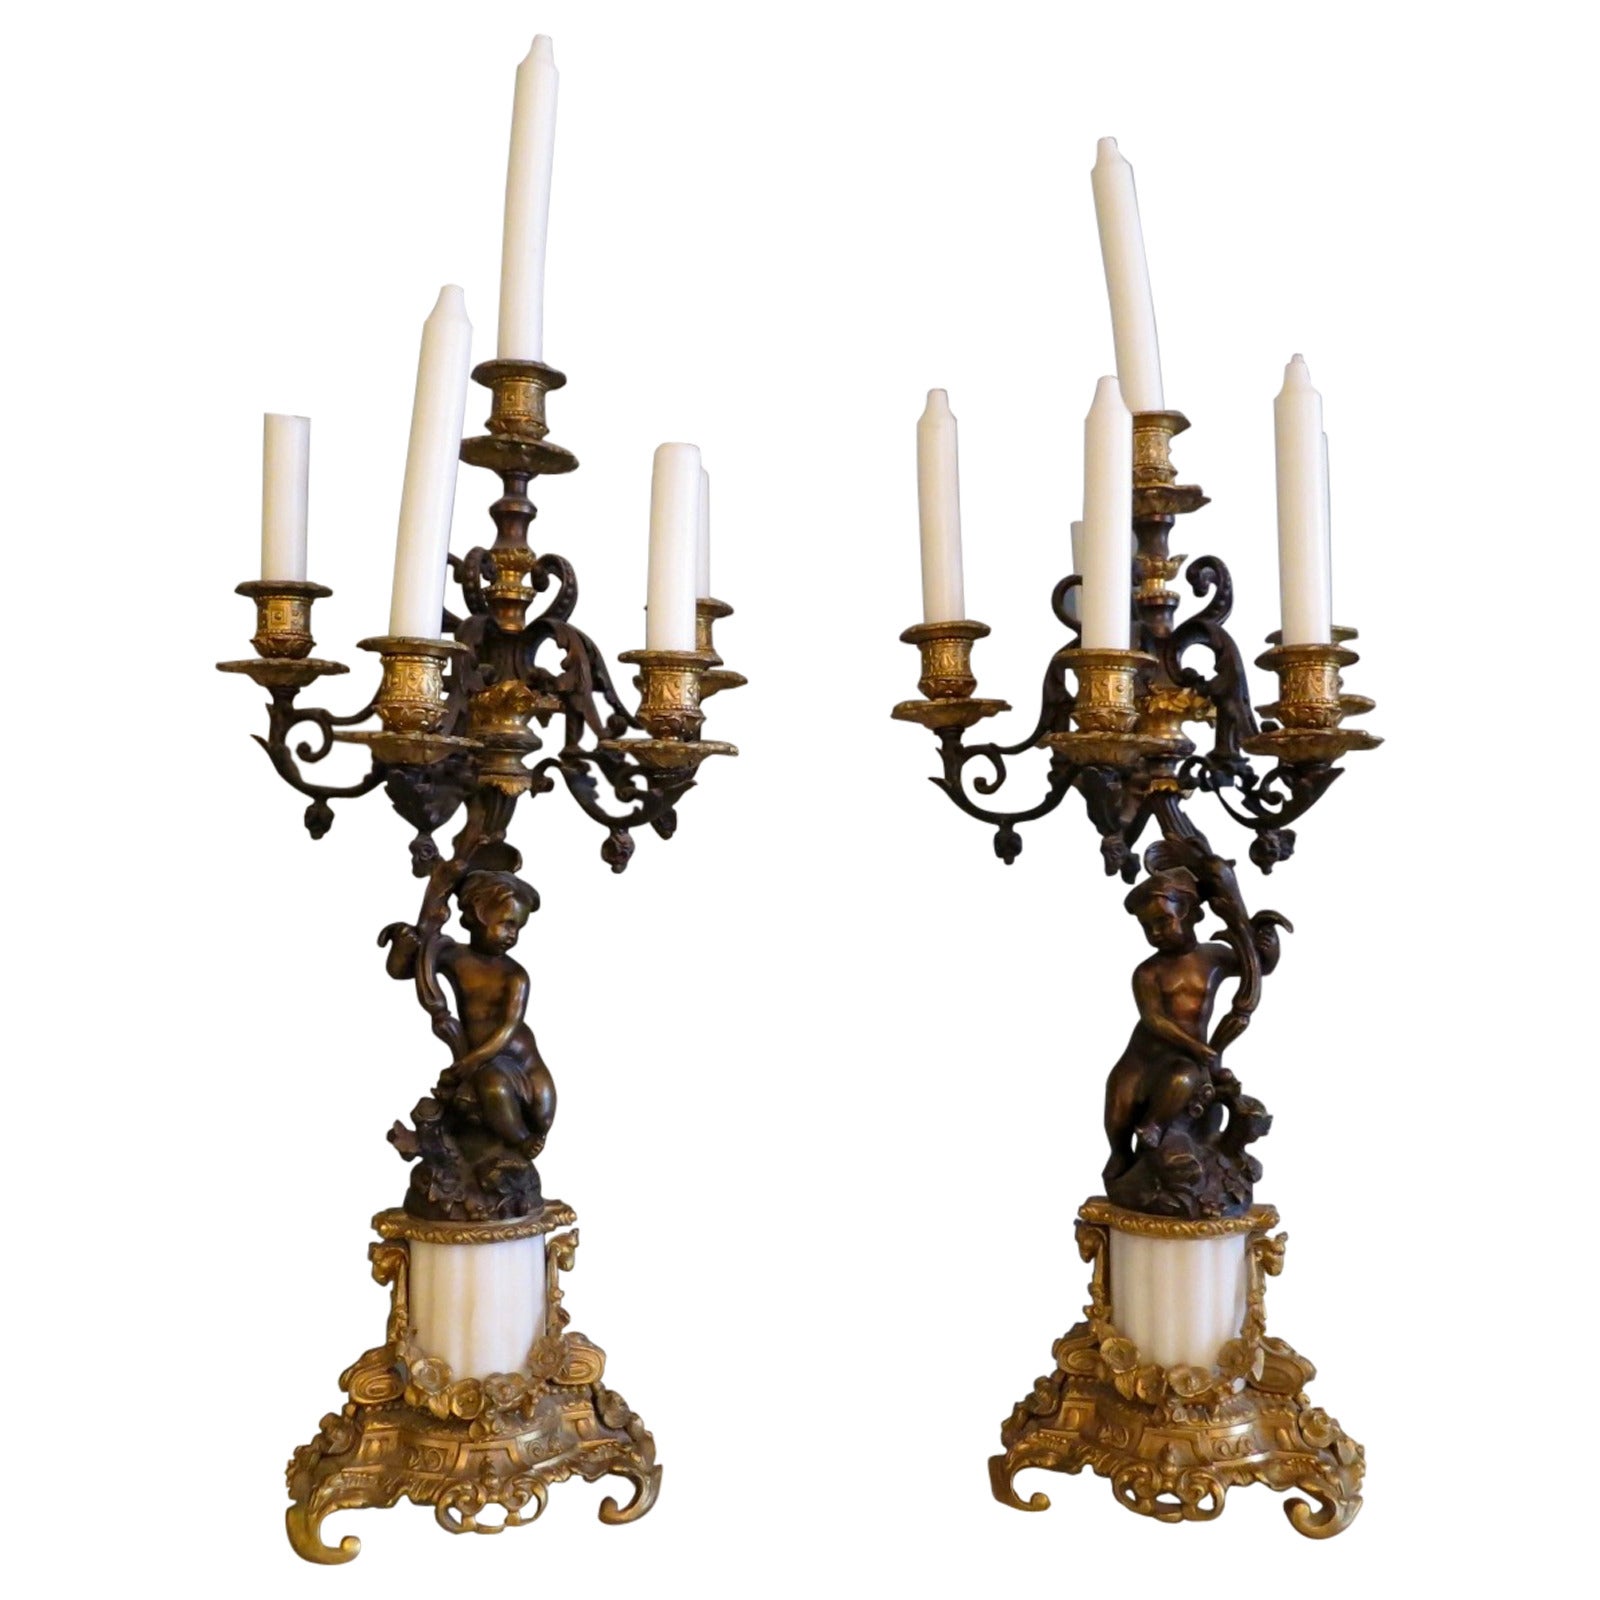 French 19th Century Patinated Bronze and Ormolu Candelabras